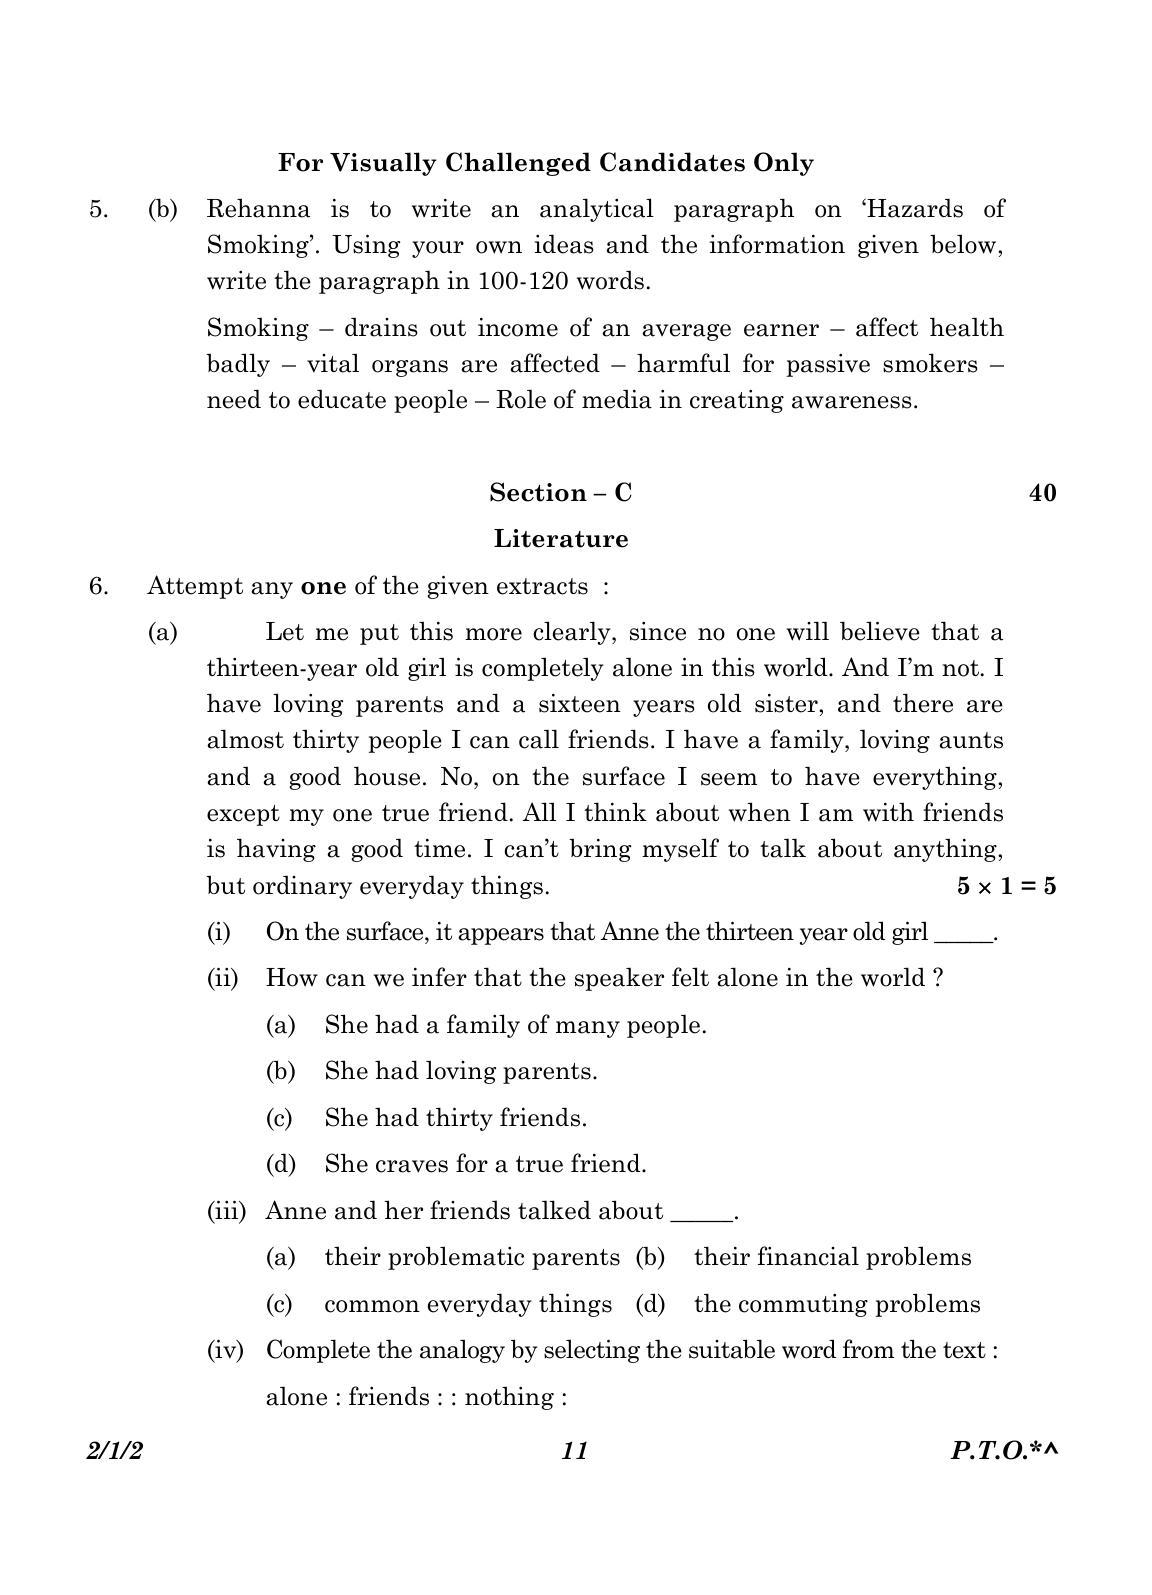 CBSE Class 10 2-1-2_English Language And Literature 2023 Question Paper - Page 11